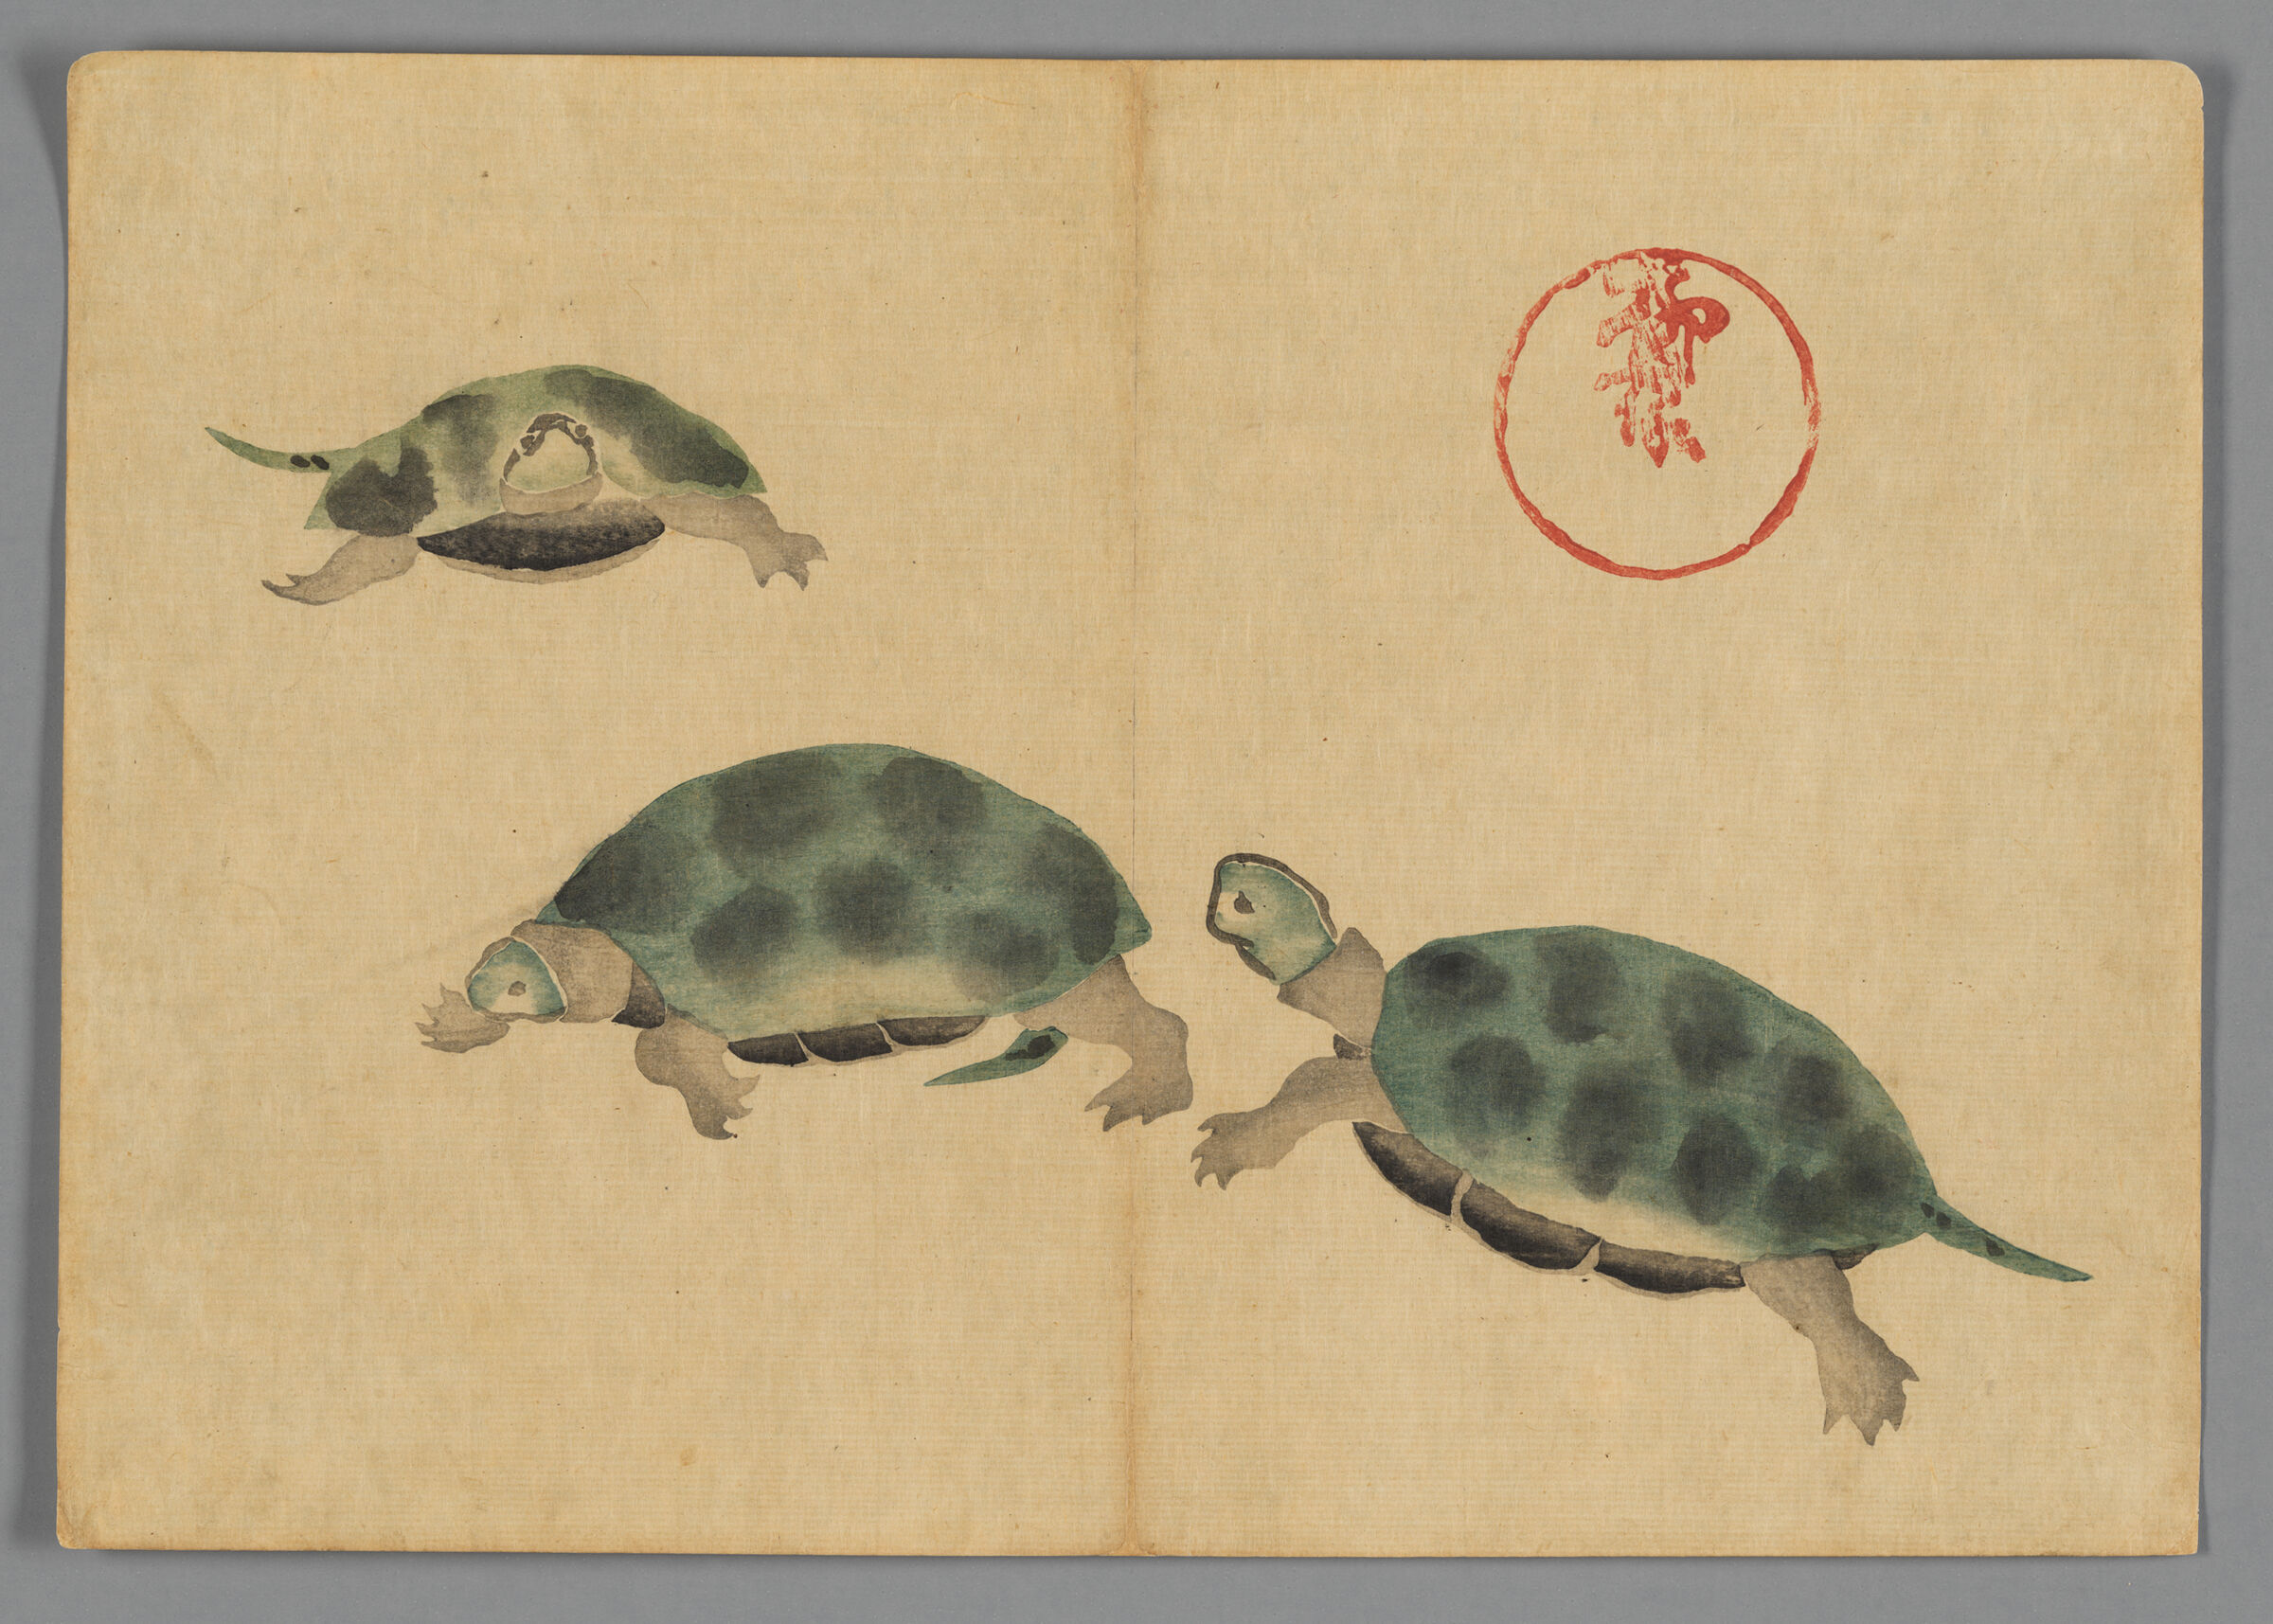 Three Turtles, From The Kōrin Gafu (Kōrin Picture Album)